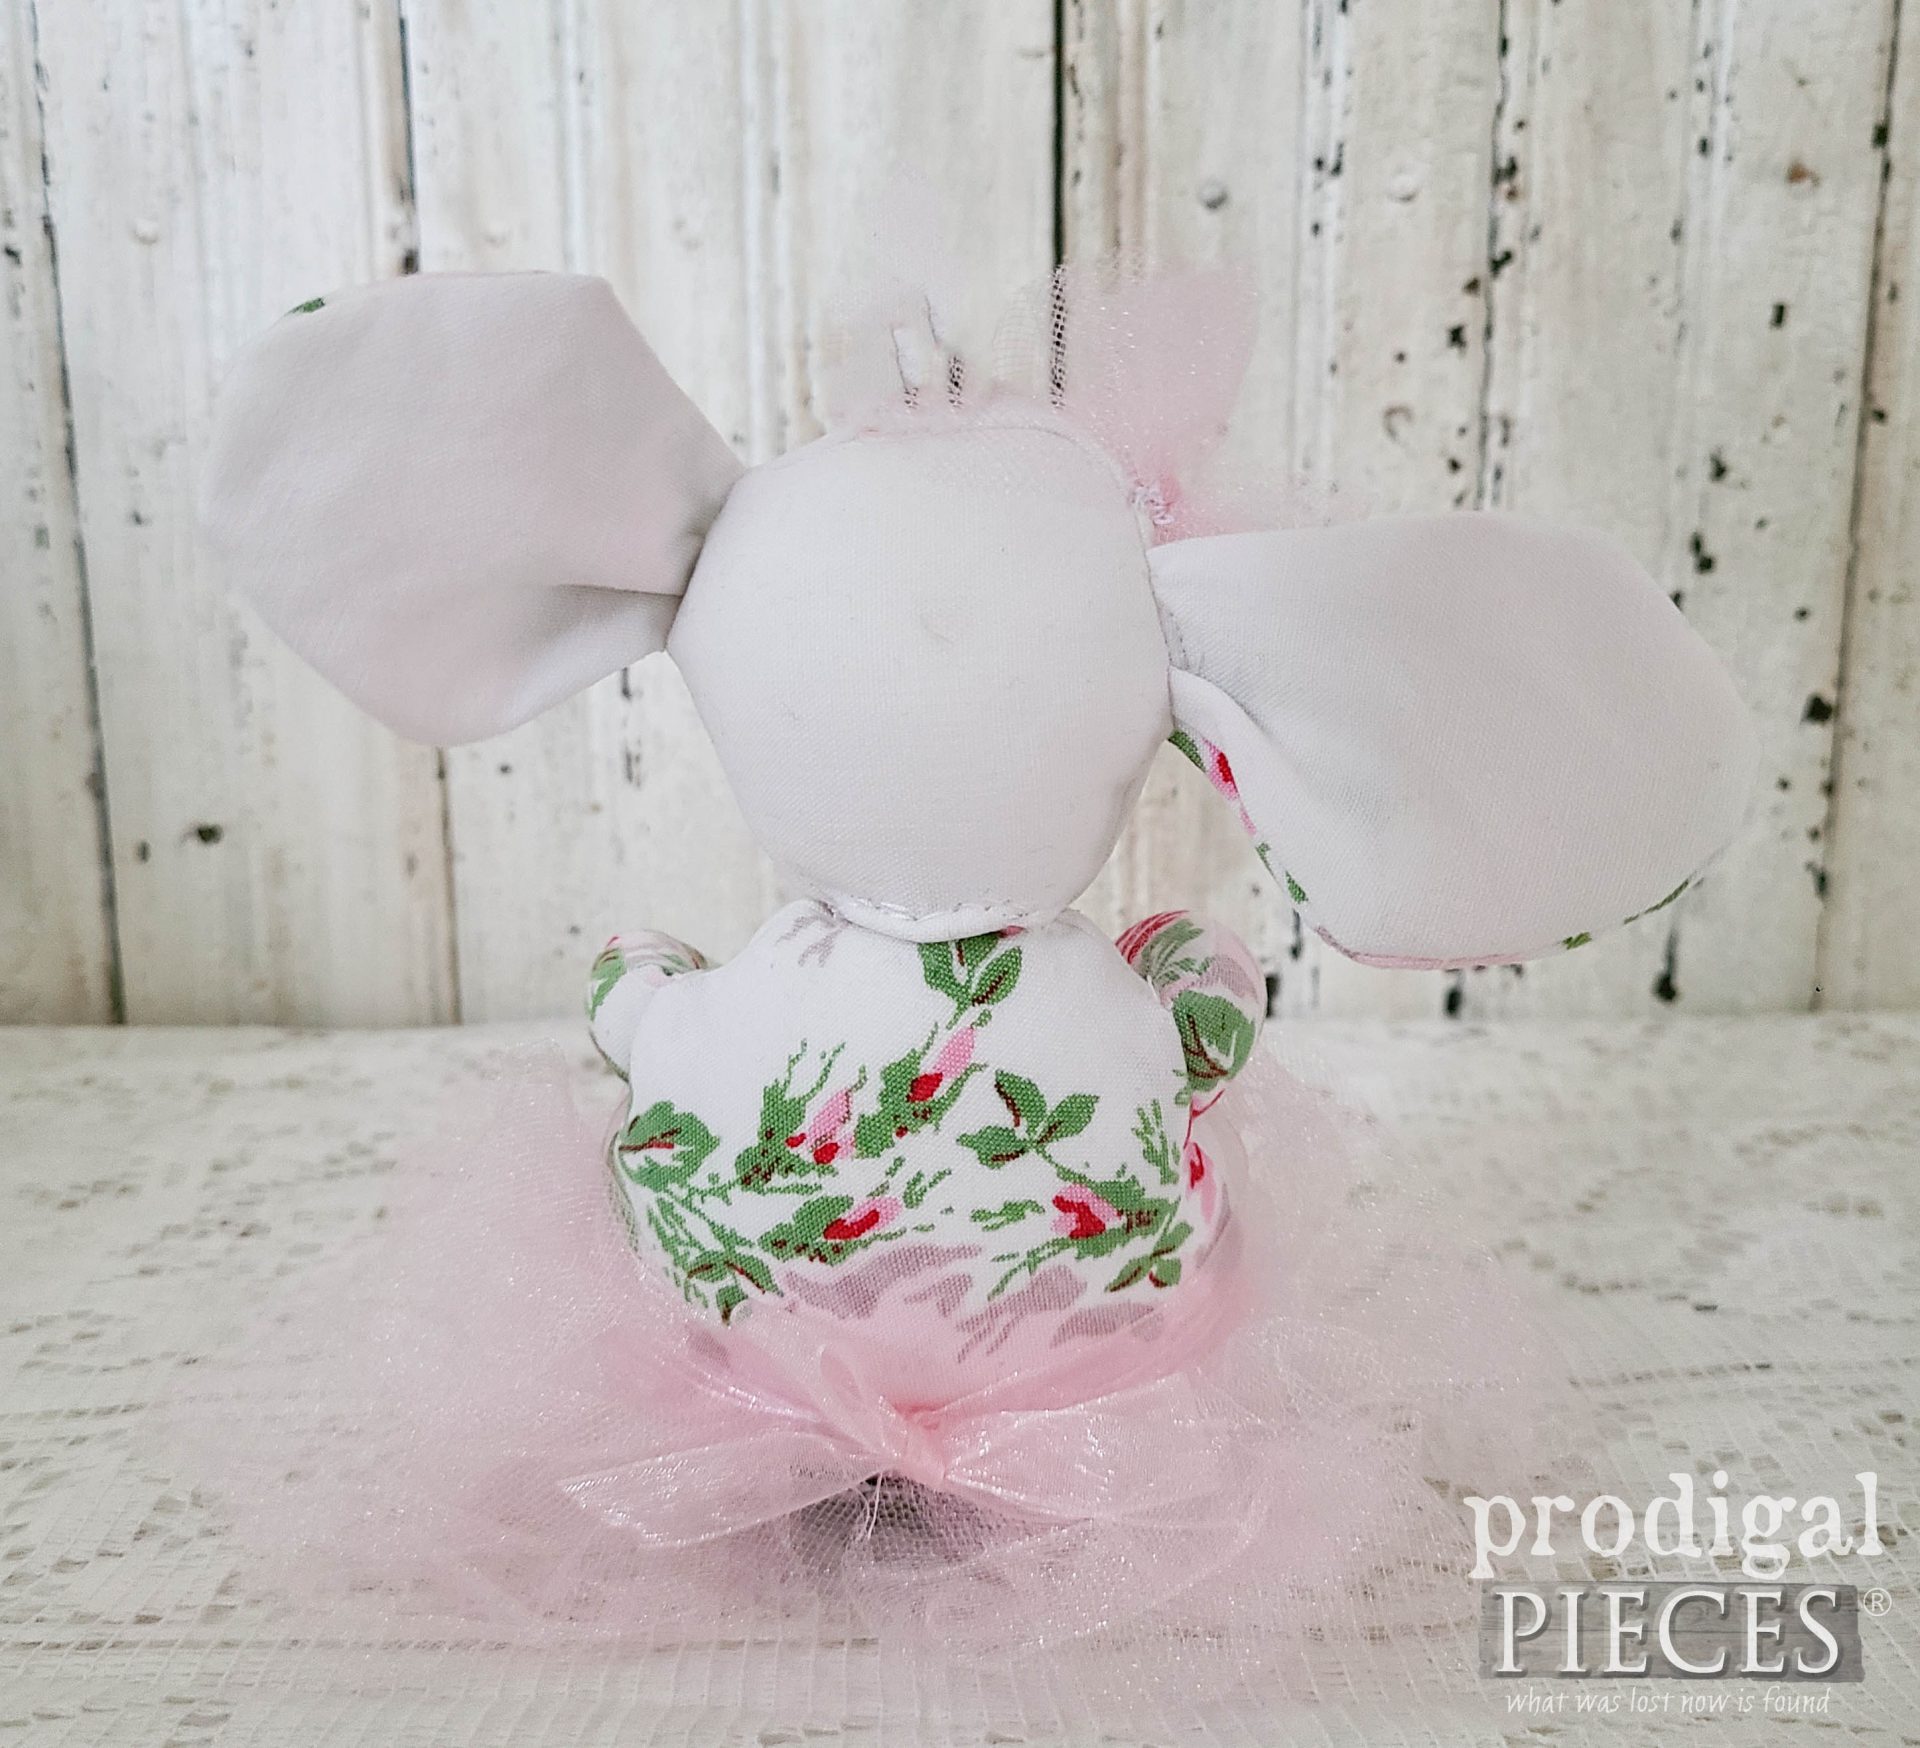 Sitting Rose Ballerina Doll from Vintage Tablecloth by Larissa of Prodigal Pieces | prodigalpieces.com #prodigalpieces #diy #upcycled #ballerina